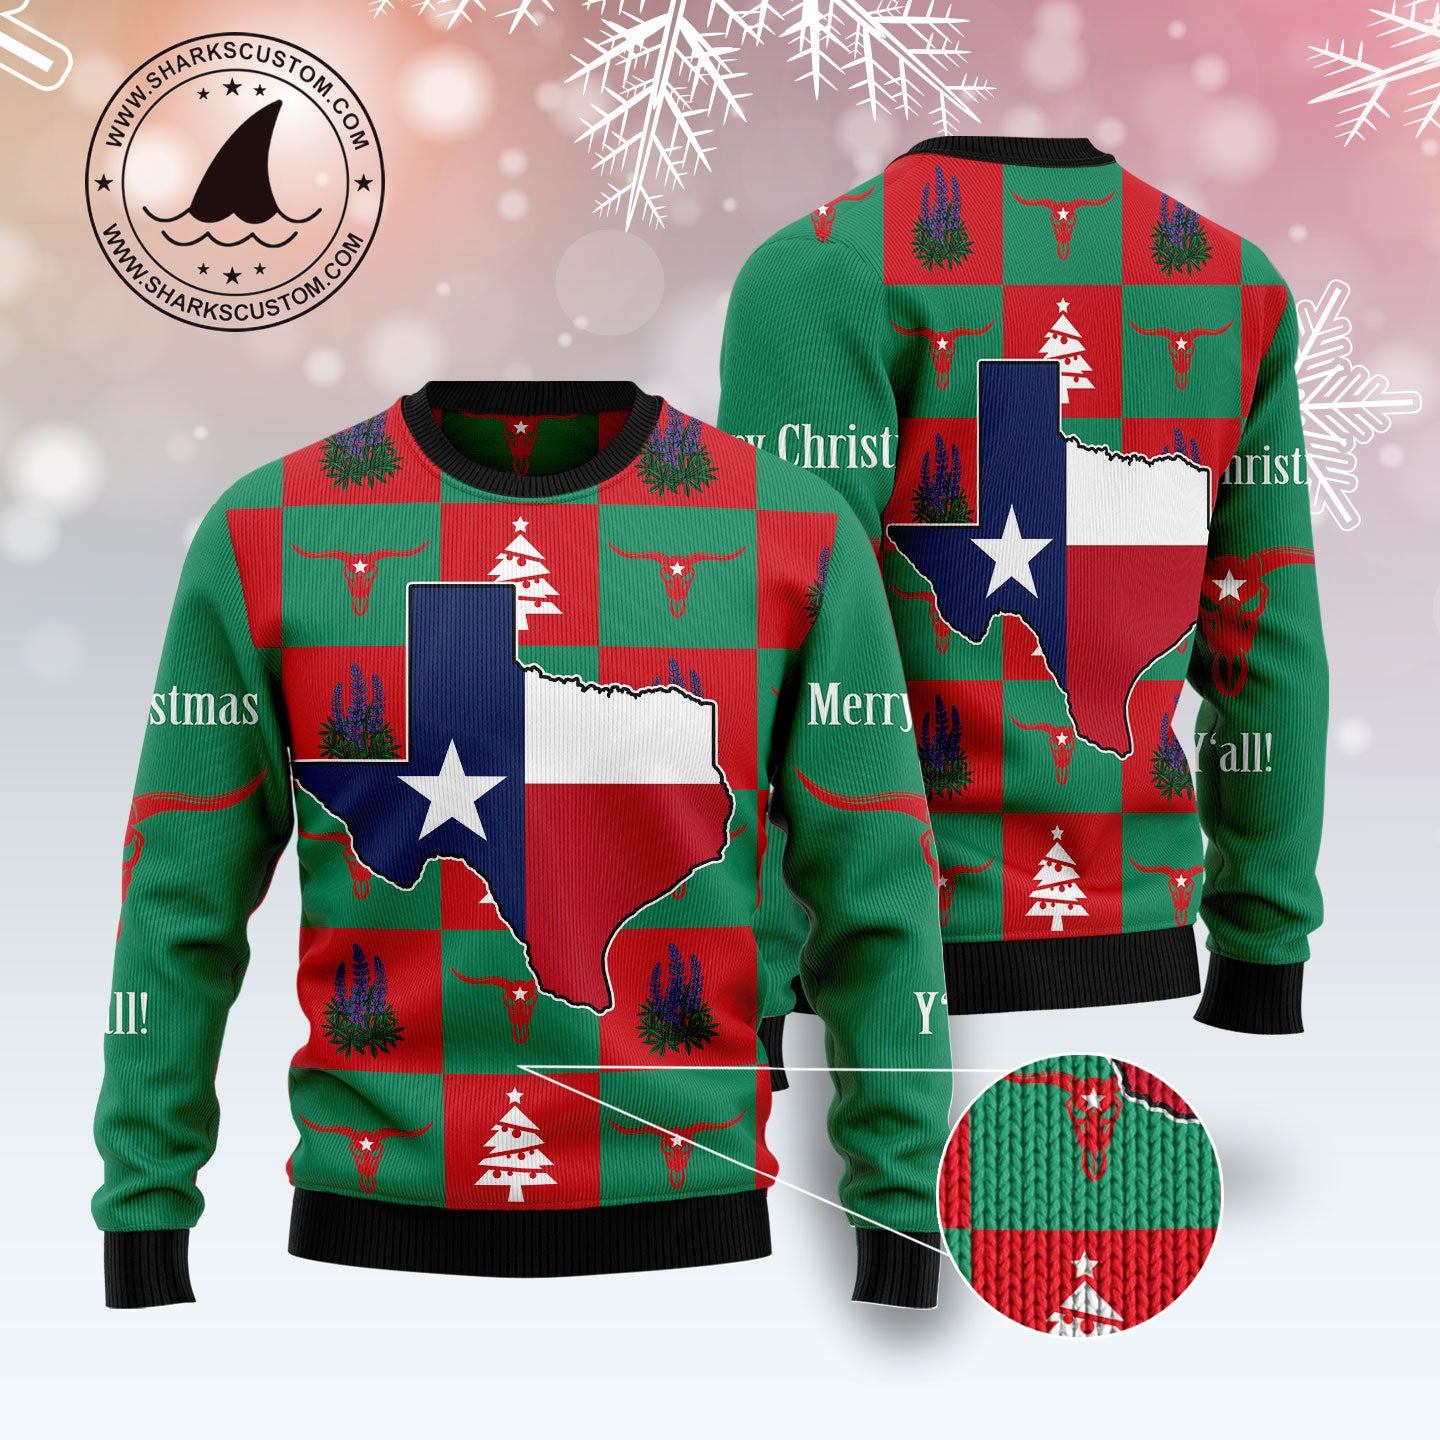 Merry Christmas Y'all! Texas HZ120813 unisex womens & mens, couples matching, friends, funny family ugly christmas holiday sweater gifts (plus size available)